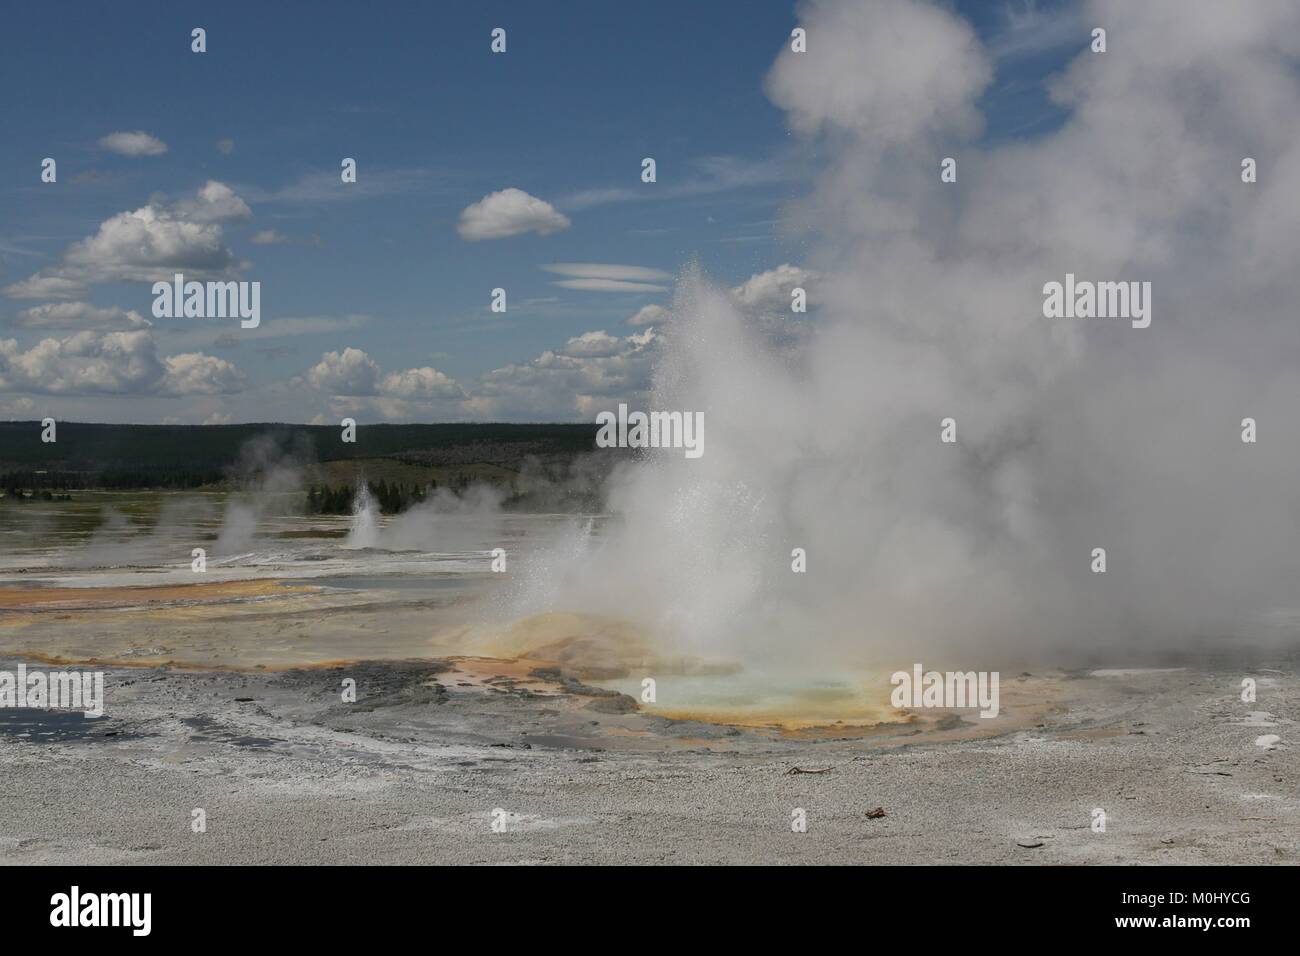 The Clepsydra Geyser erupts in the Lower Geyser Basin at the Yellowstone National Park July 28, 2009 in Wyoming. Stock Photo